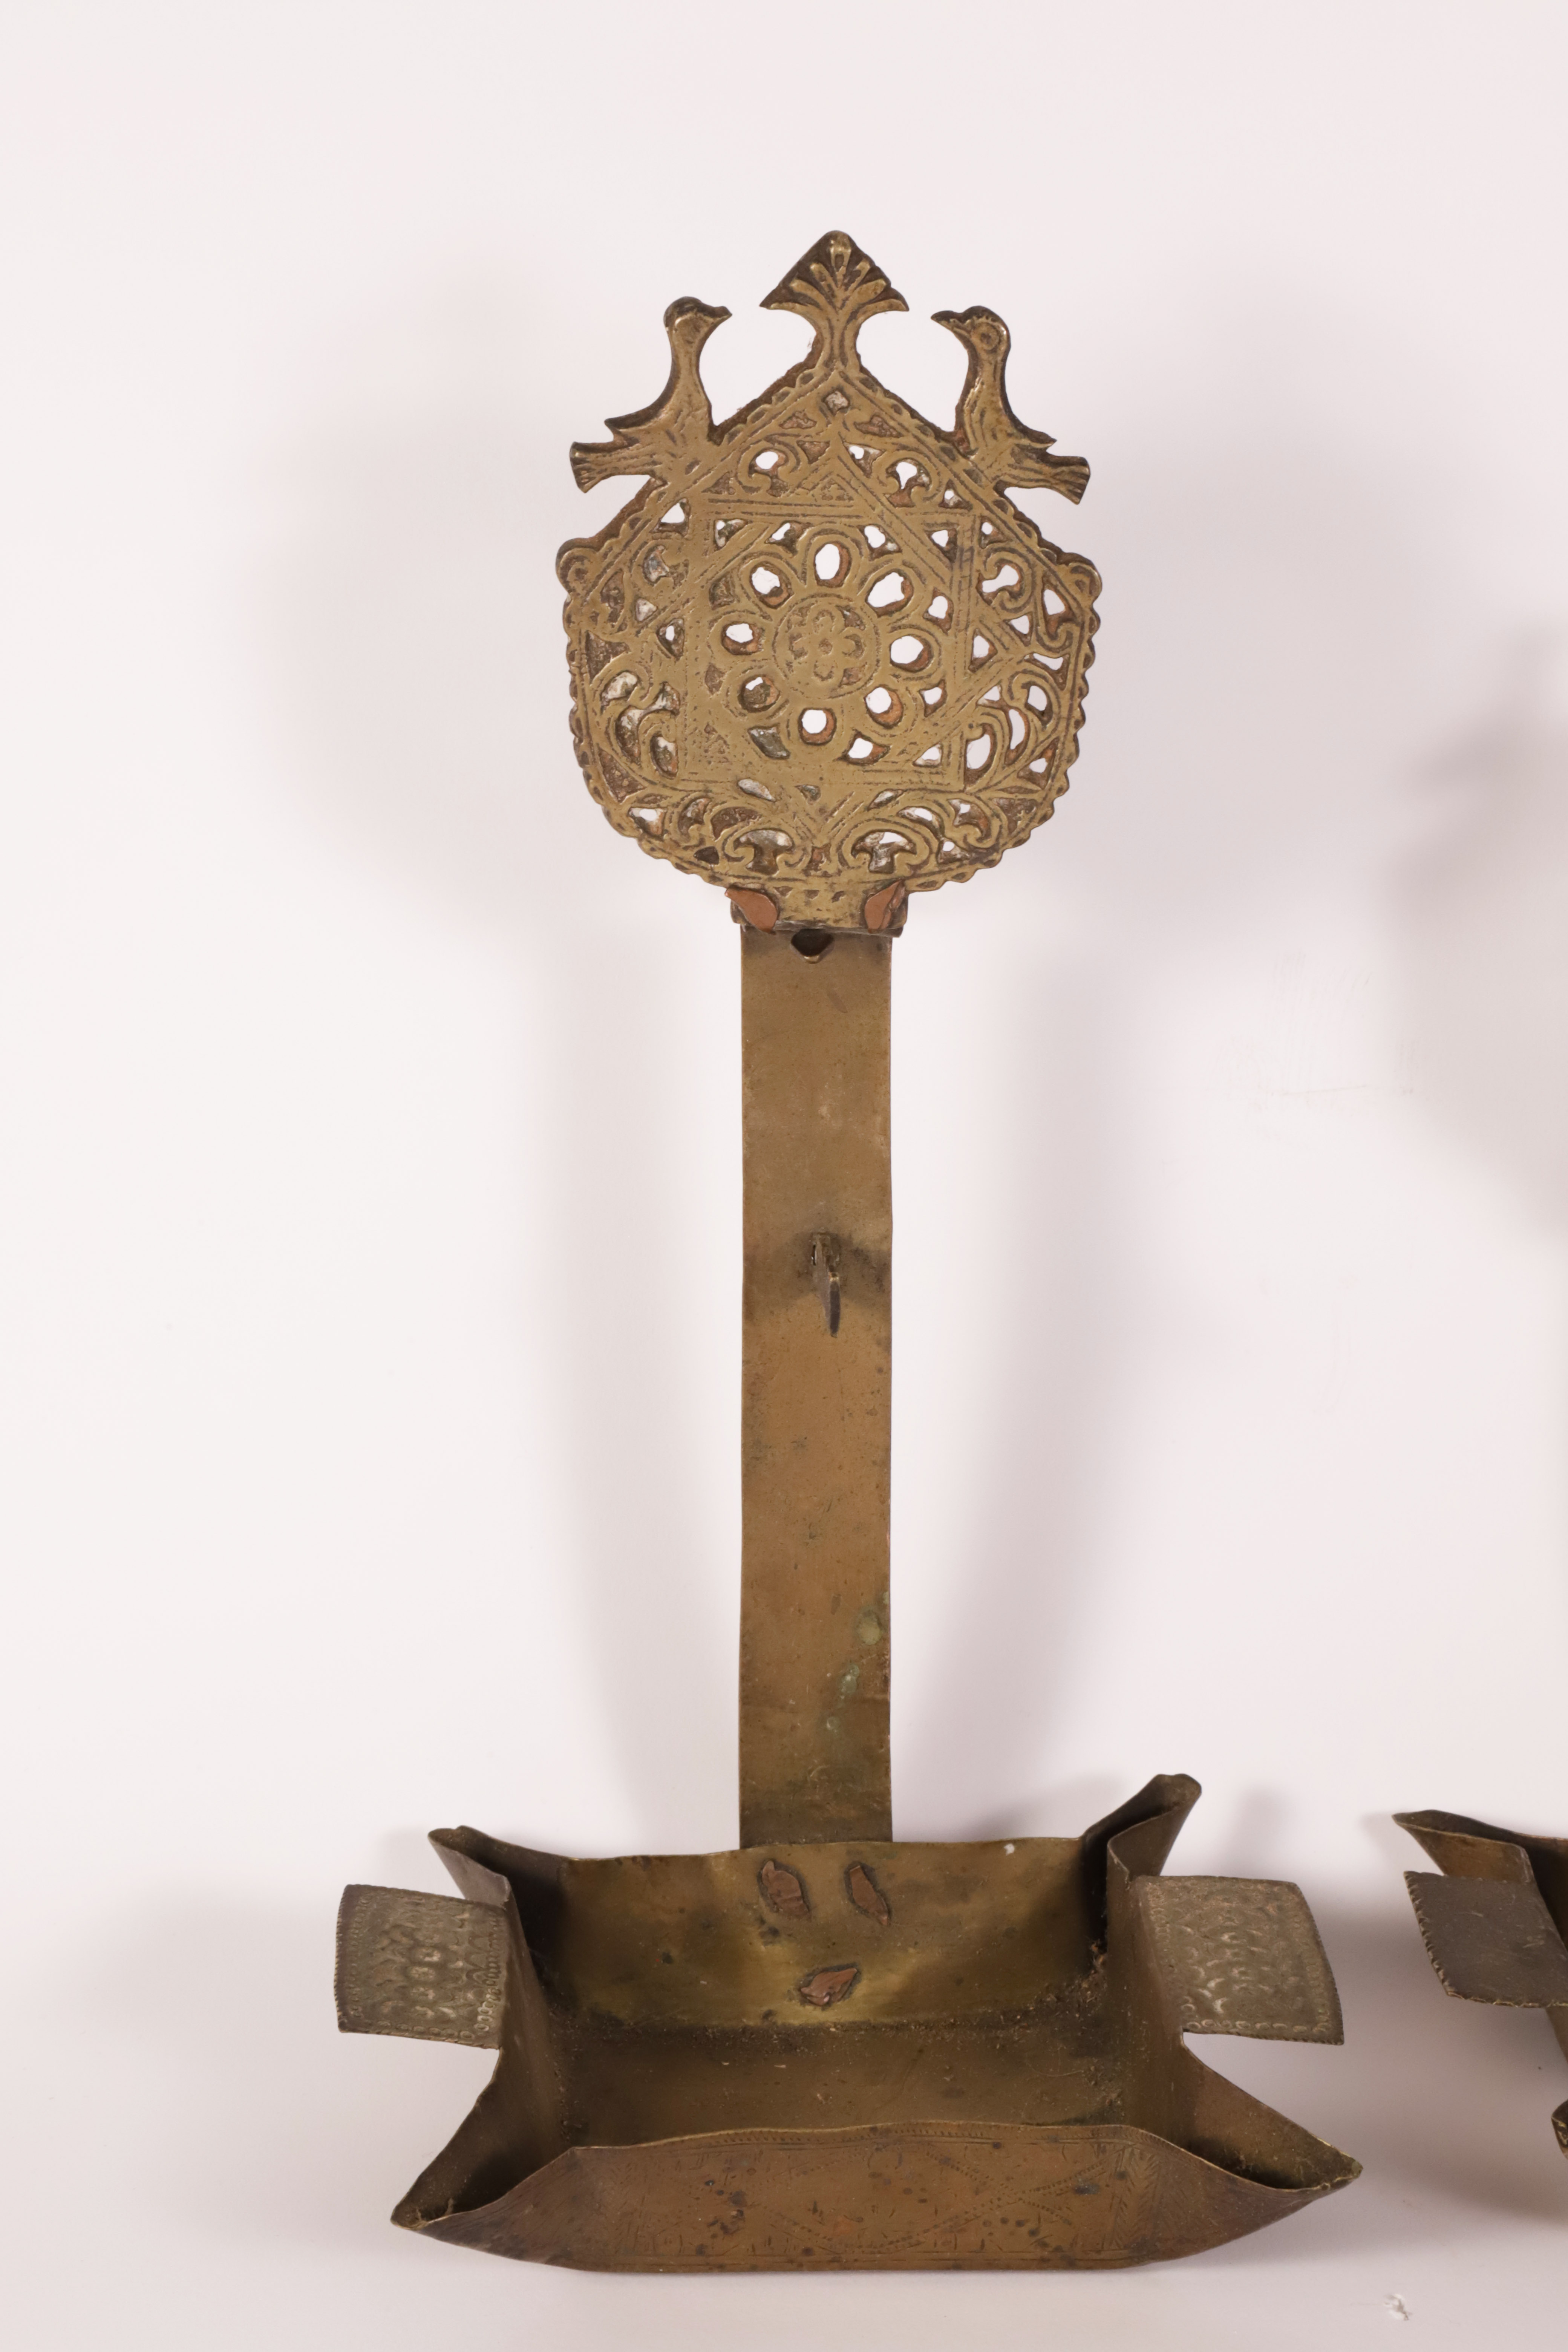 Moroccan Brass Double-Cruse Four Wick Fat Burning Lamp, 19th Century